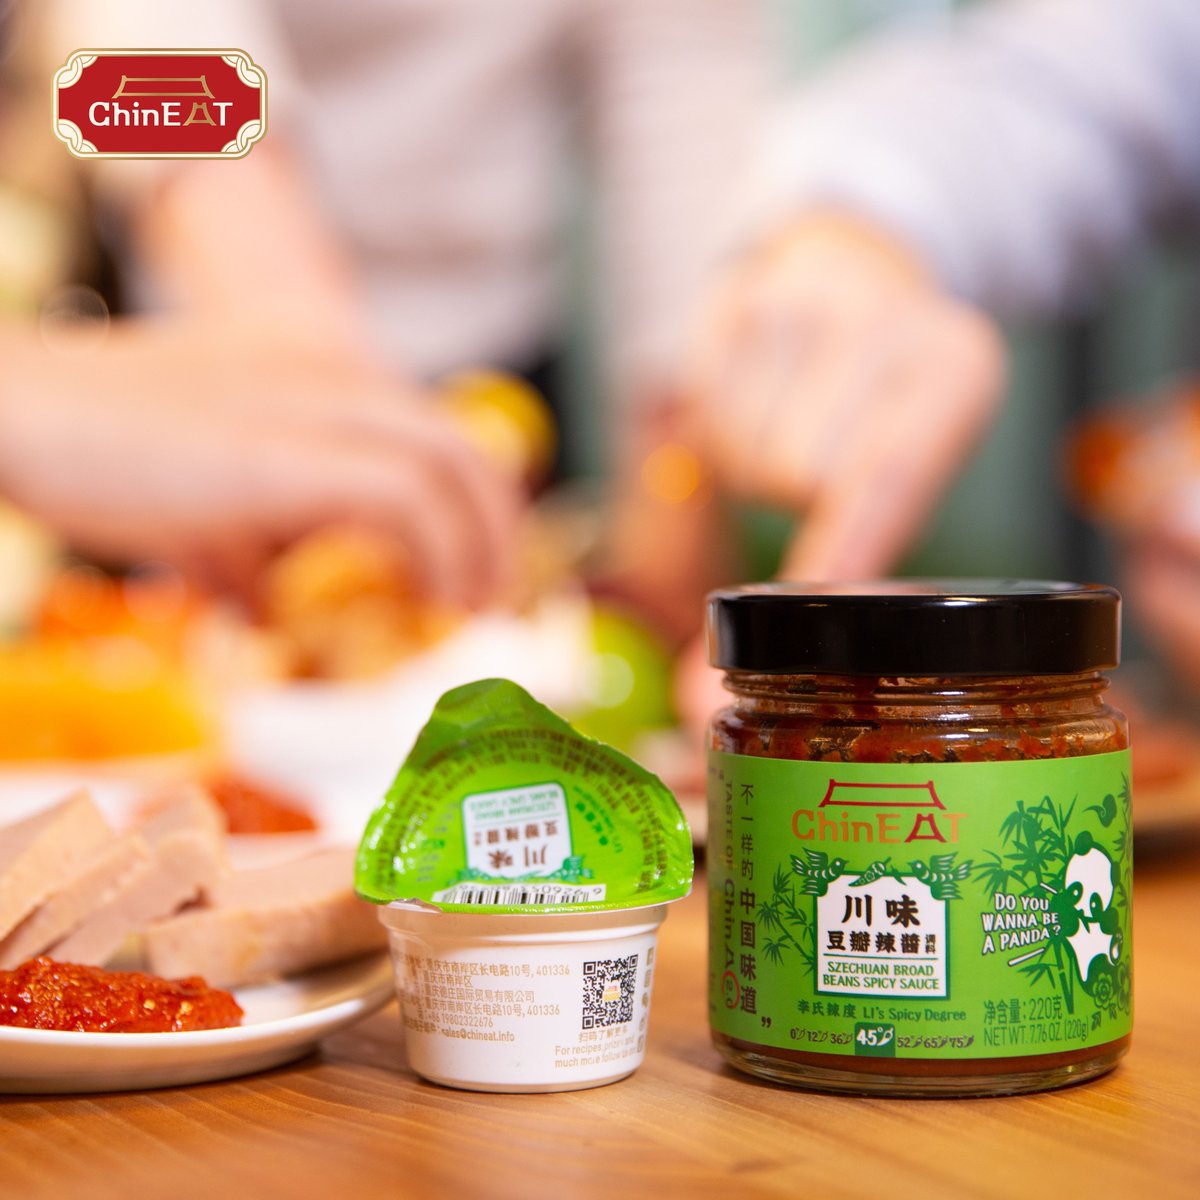 Wade into the realm of Chinese gastronomy with our Szechuan Broad Bean Spicy Sauce!

Visit chineatofficial.com and drop an Email to office@chineat.info and keep in touch with us! ⁠

#chinesefood #asianfood #cucinacinese #szechuanbroadbean #szechuanesefood #szechuanesecuisine